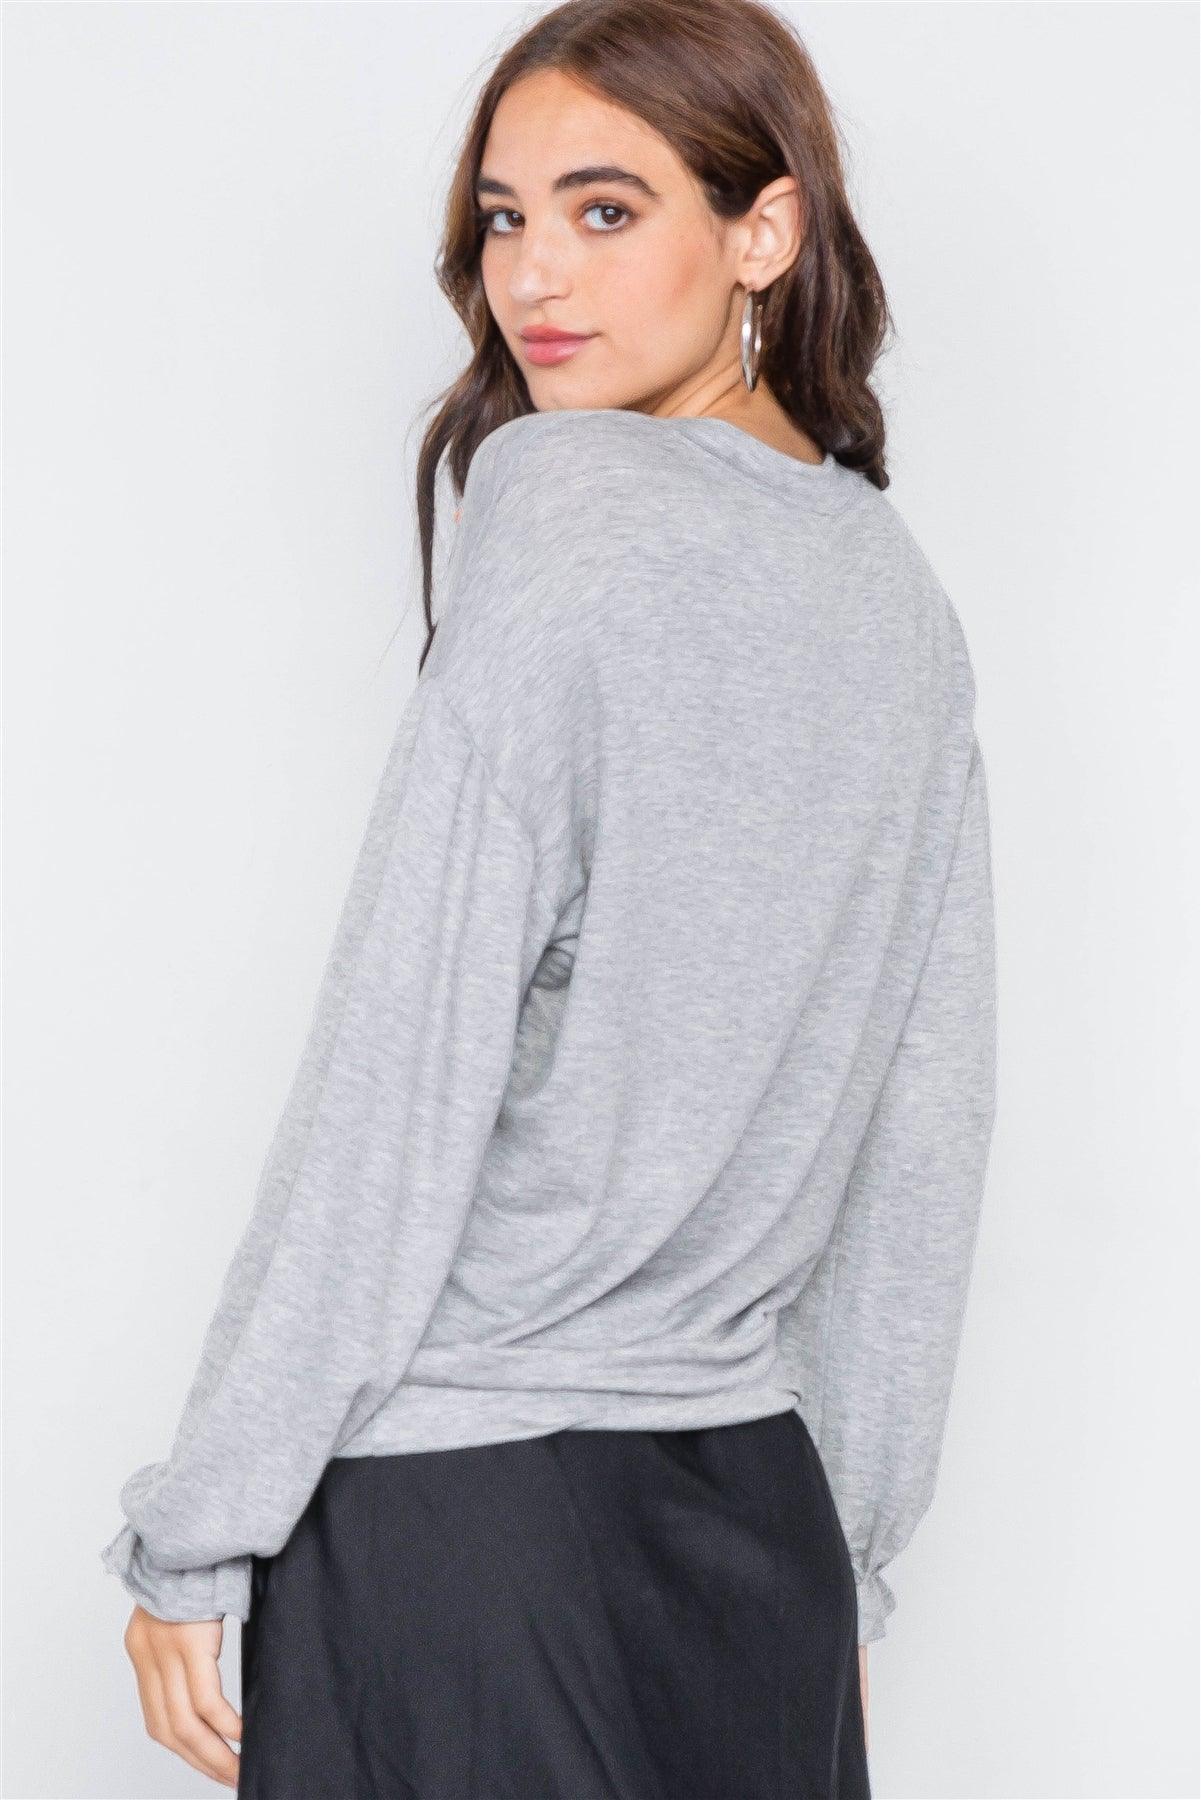 Heather Grey "TAKE IT DAY BY DAY" Graphic Cozy Flounce Cuff Sweater /2-2-2